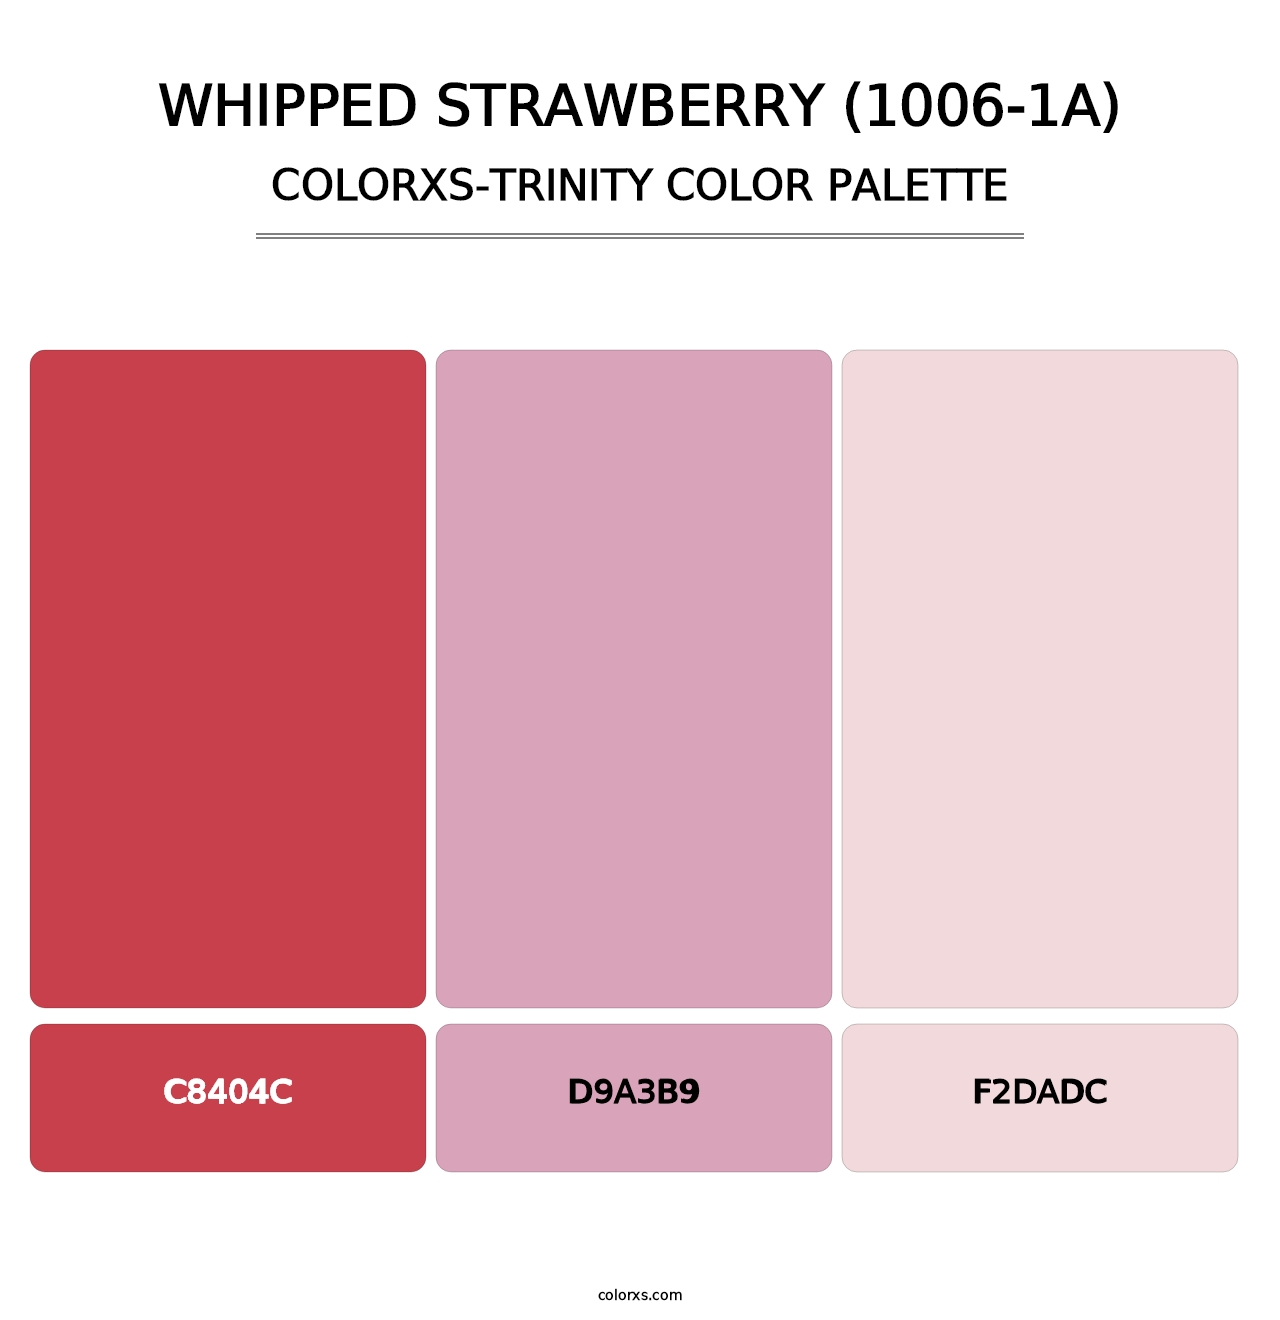 Whipped Strawberry (1006-1A) - Colorxs Trinity Palette